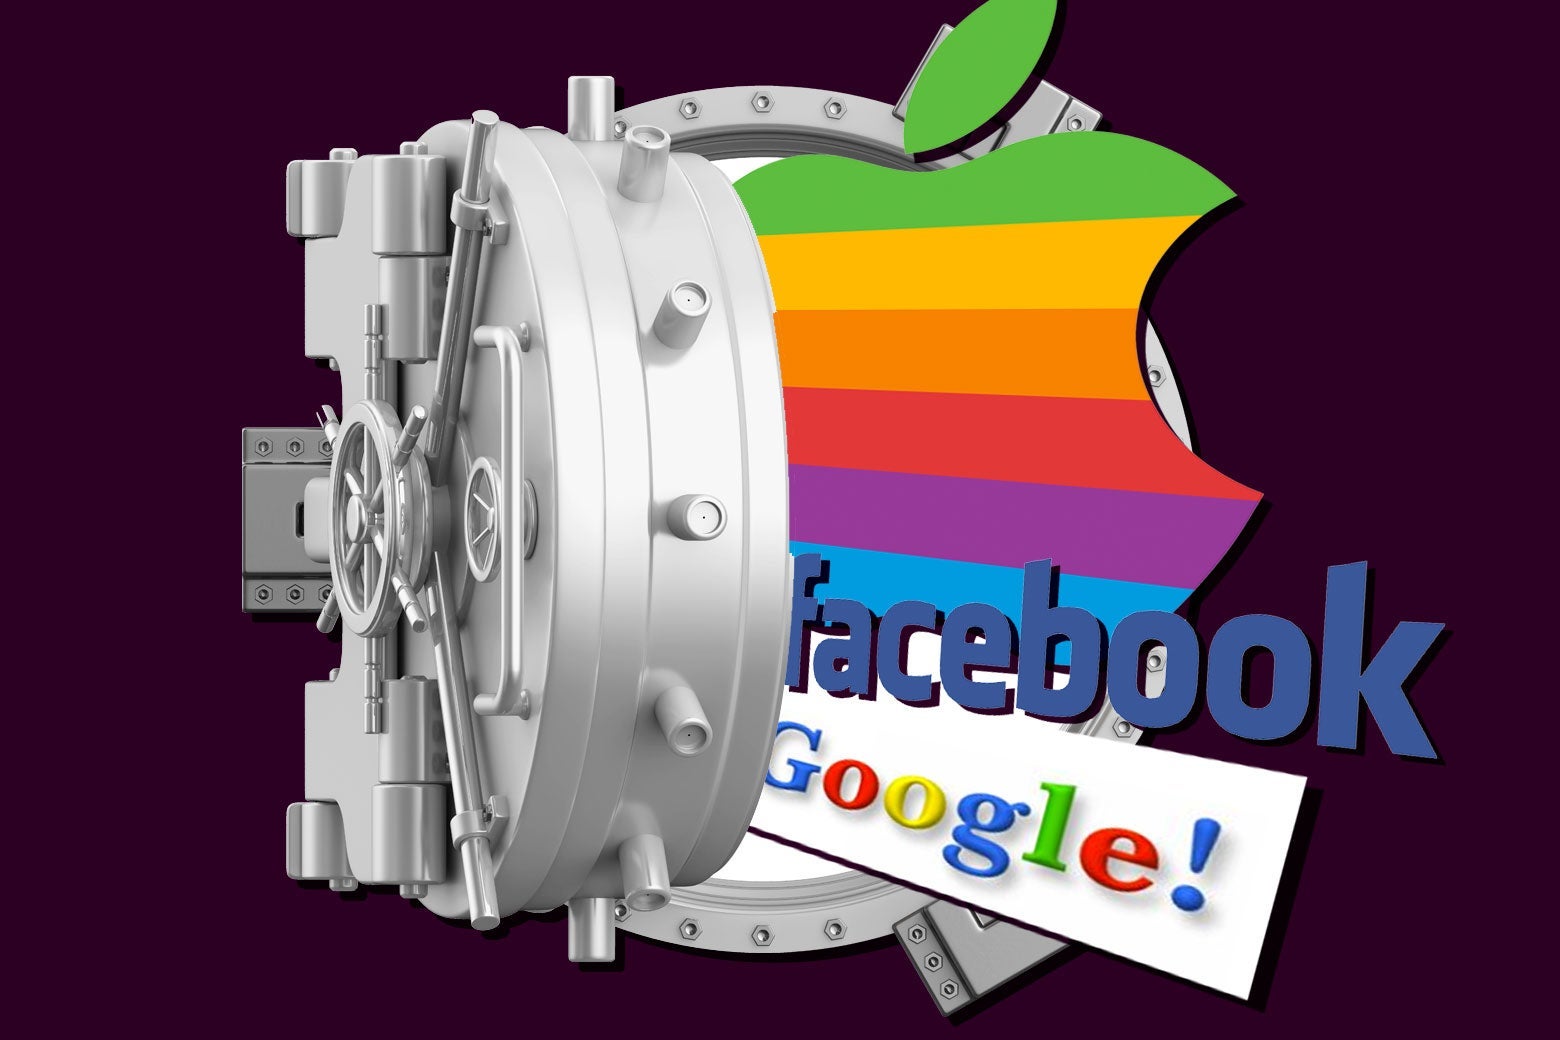 An open vault from which old Apple, Facebook, and Google logos are spilling out